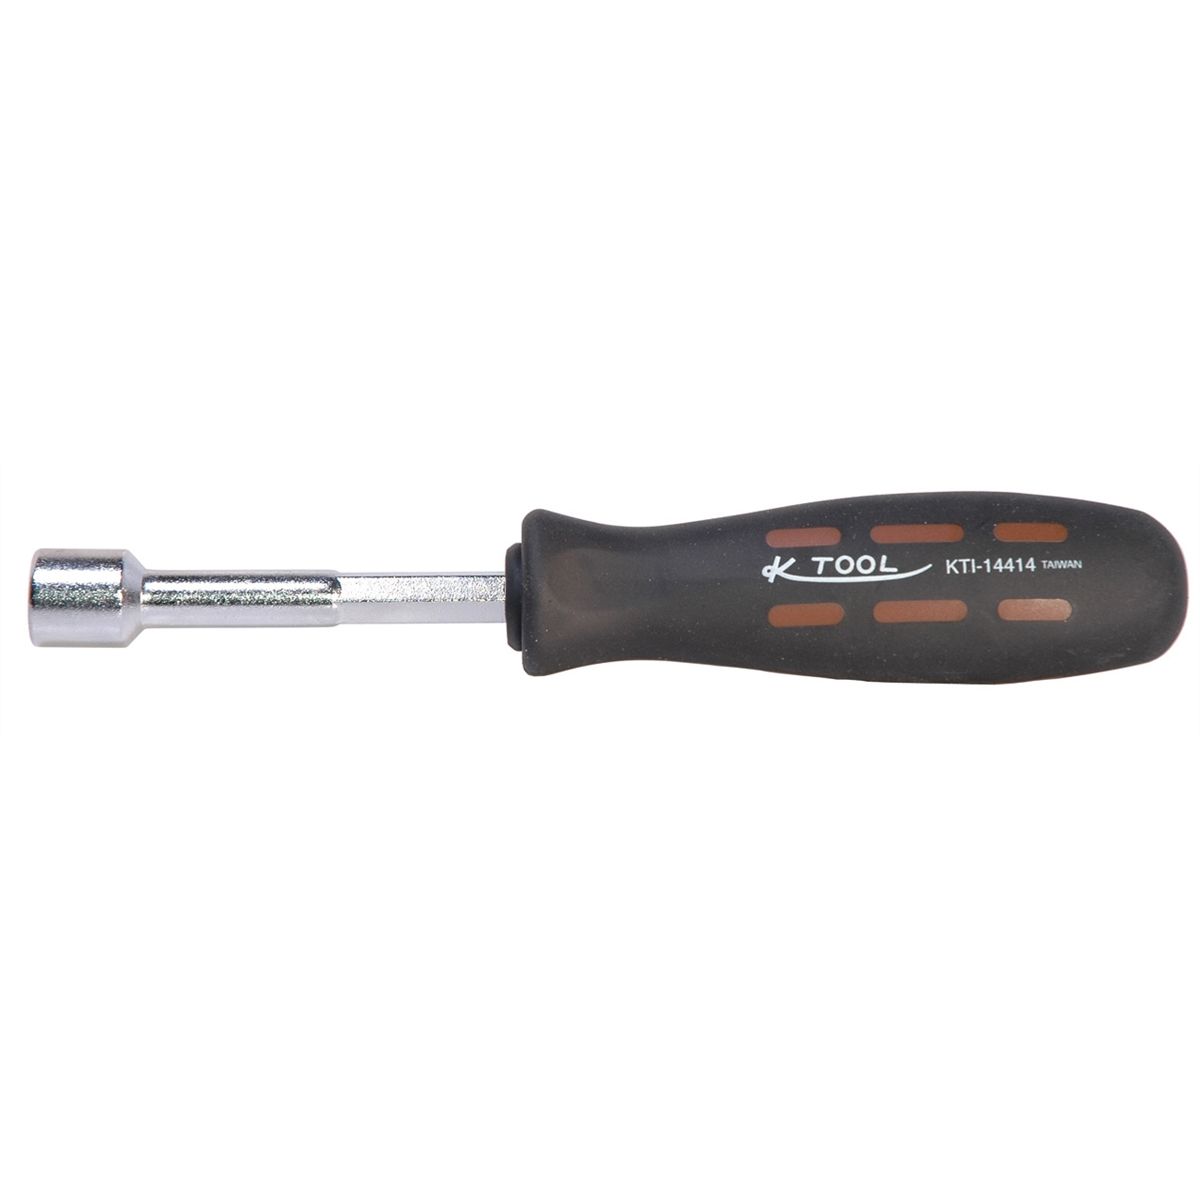 7/16" x 3" Fractional Nut Driver